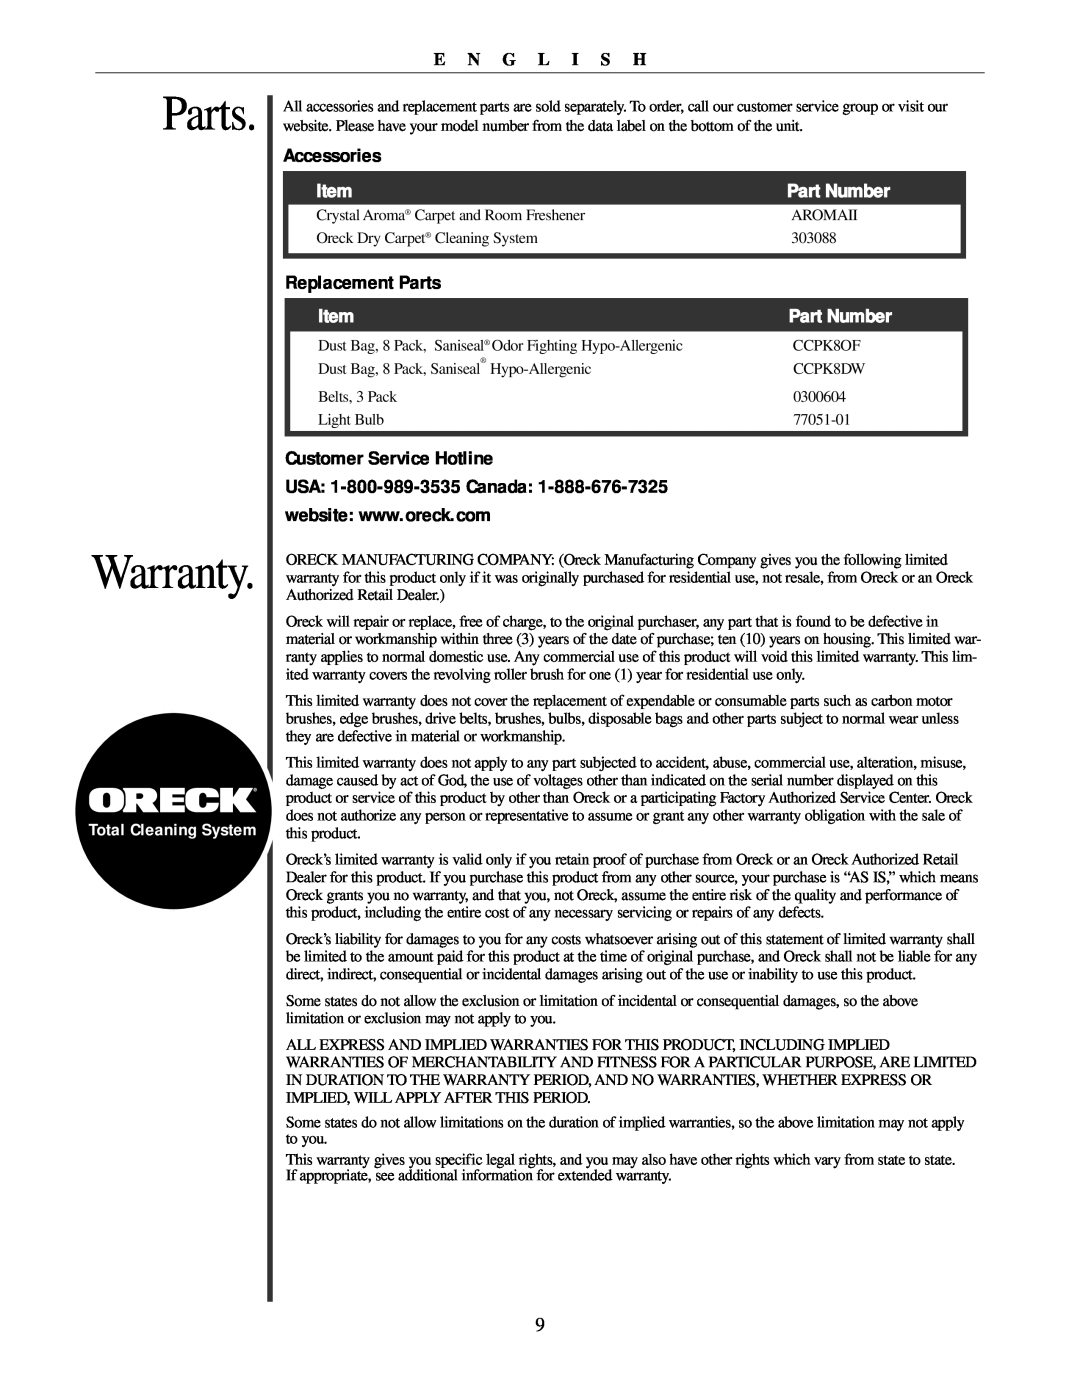 Oreck U3771 manual Parts Warranty, Accessories, Part Number, Replacement Parts, Customer Service Hotline, E N G L I S H 